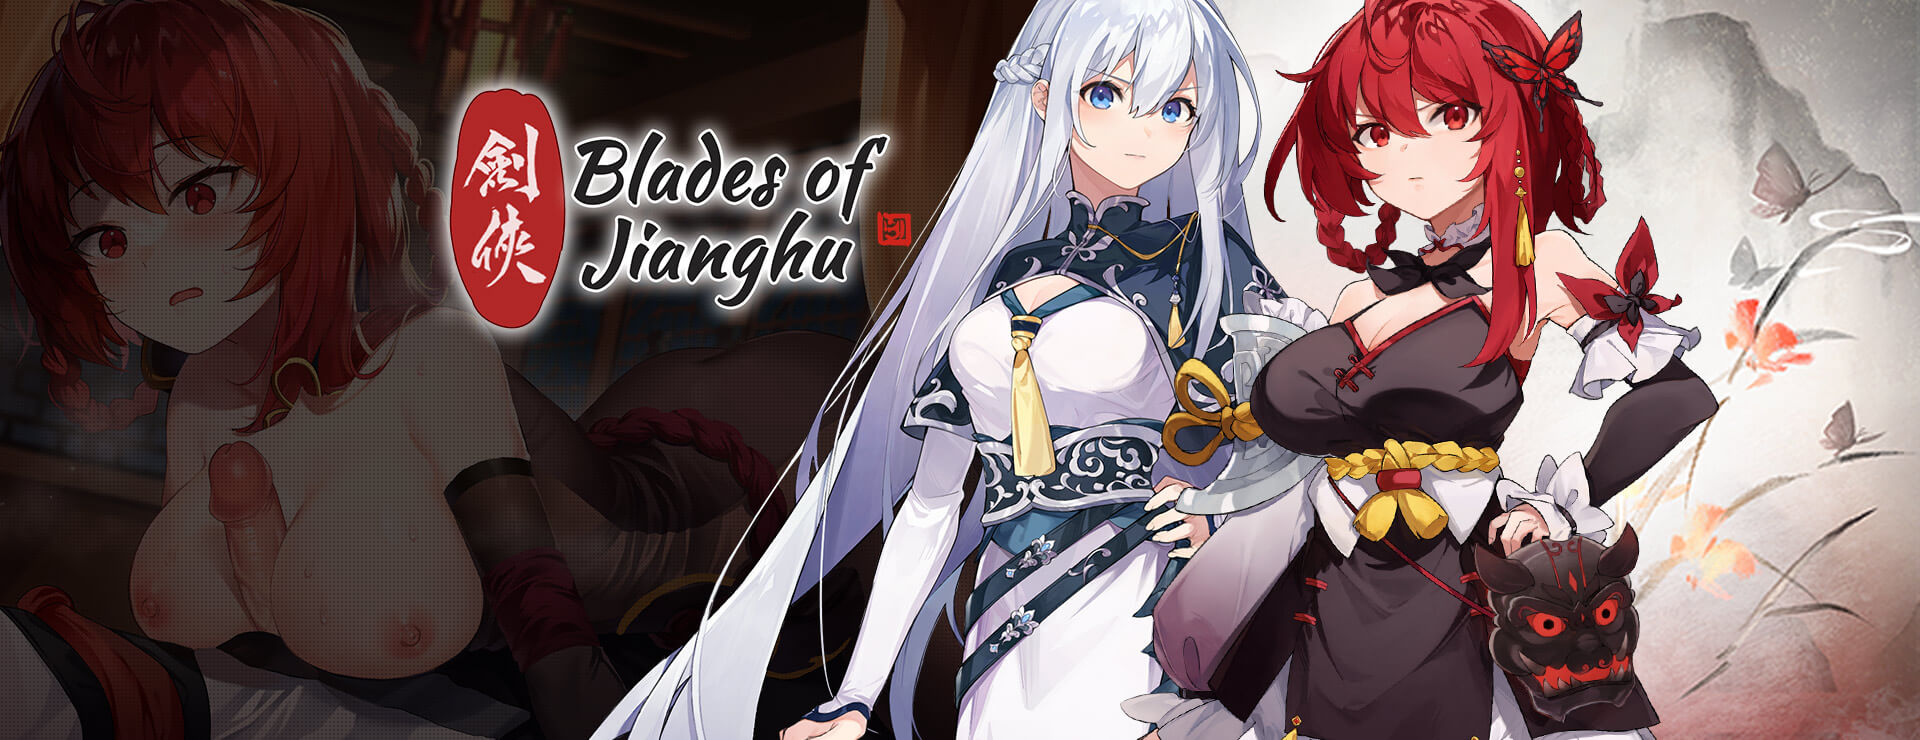 Blades of Jianghu: Ballad of Wind and Dust - RPG Game